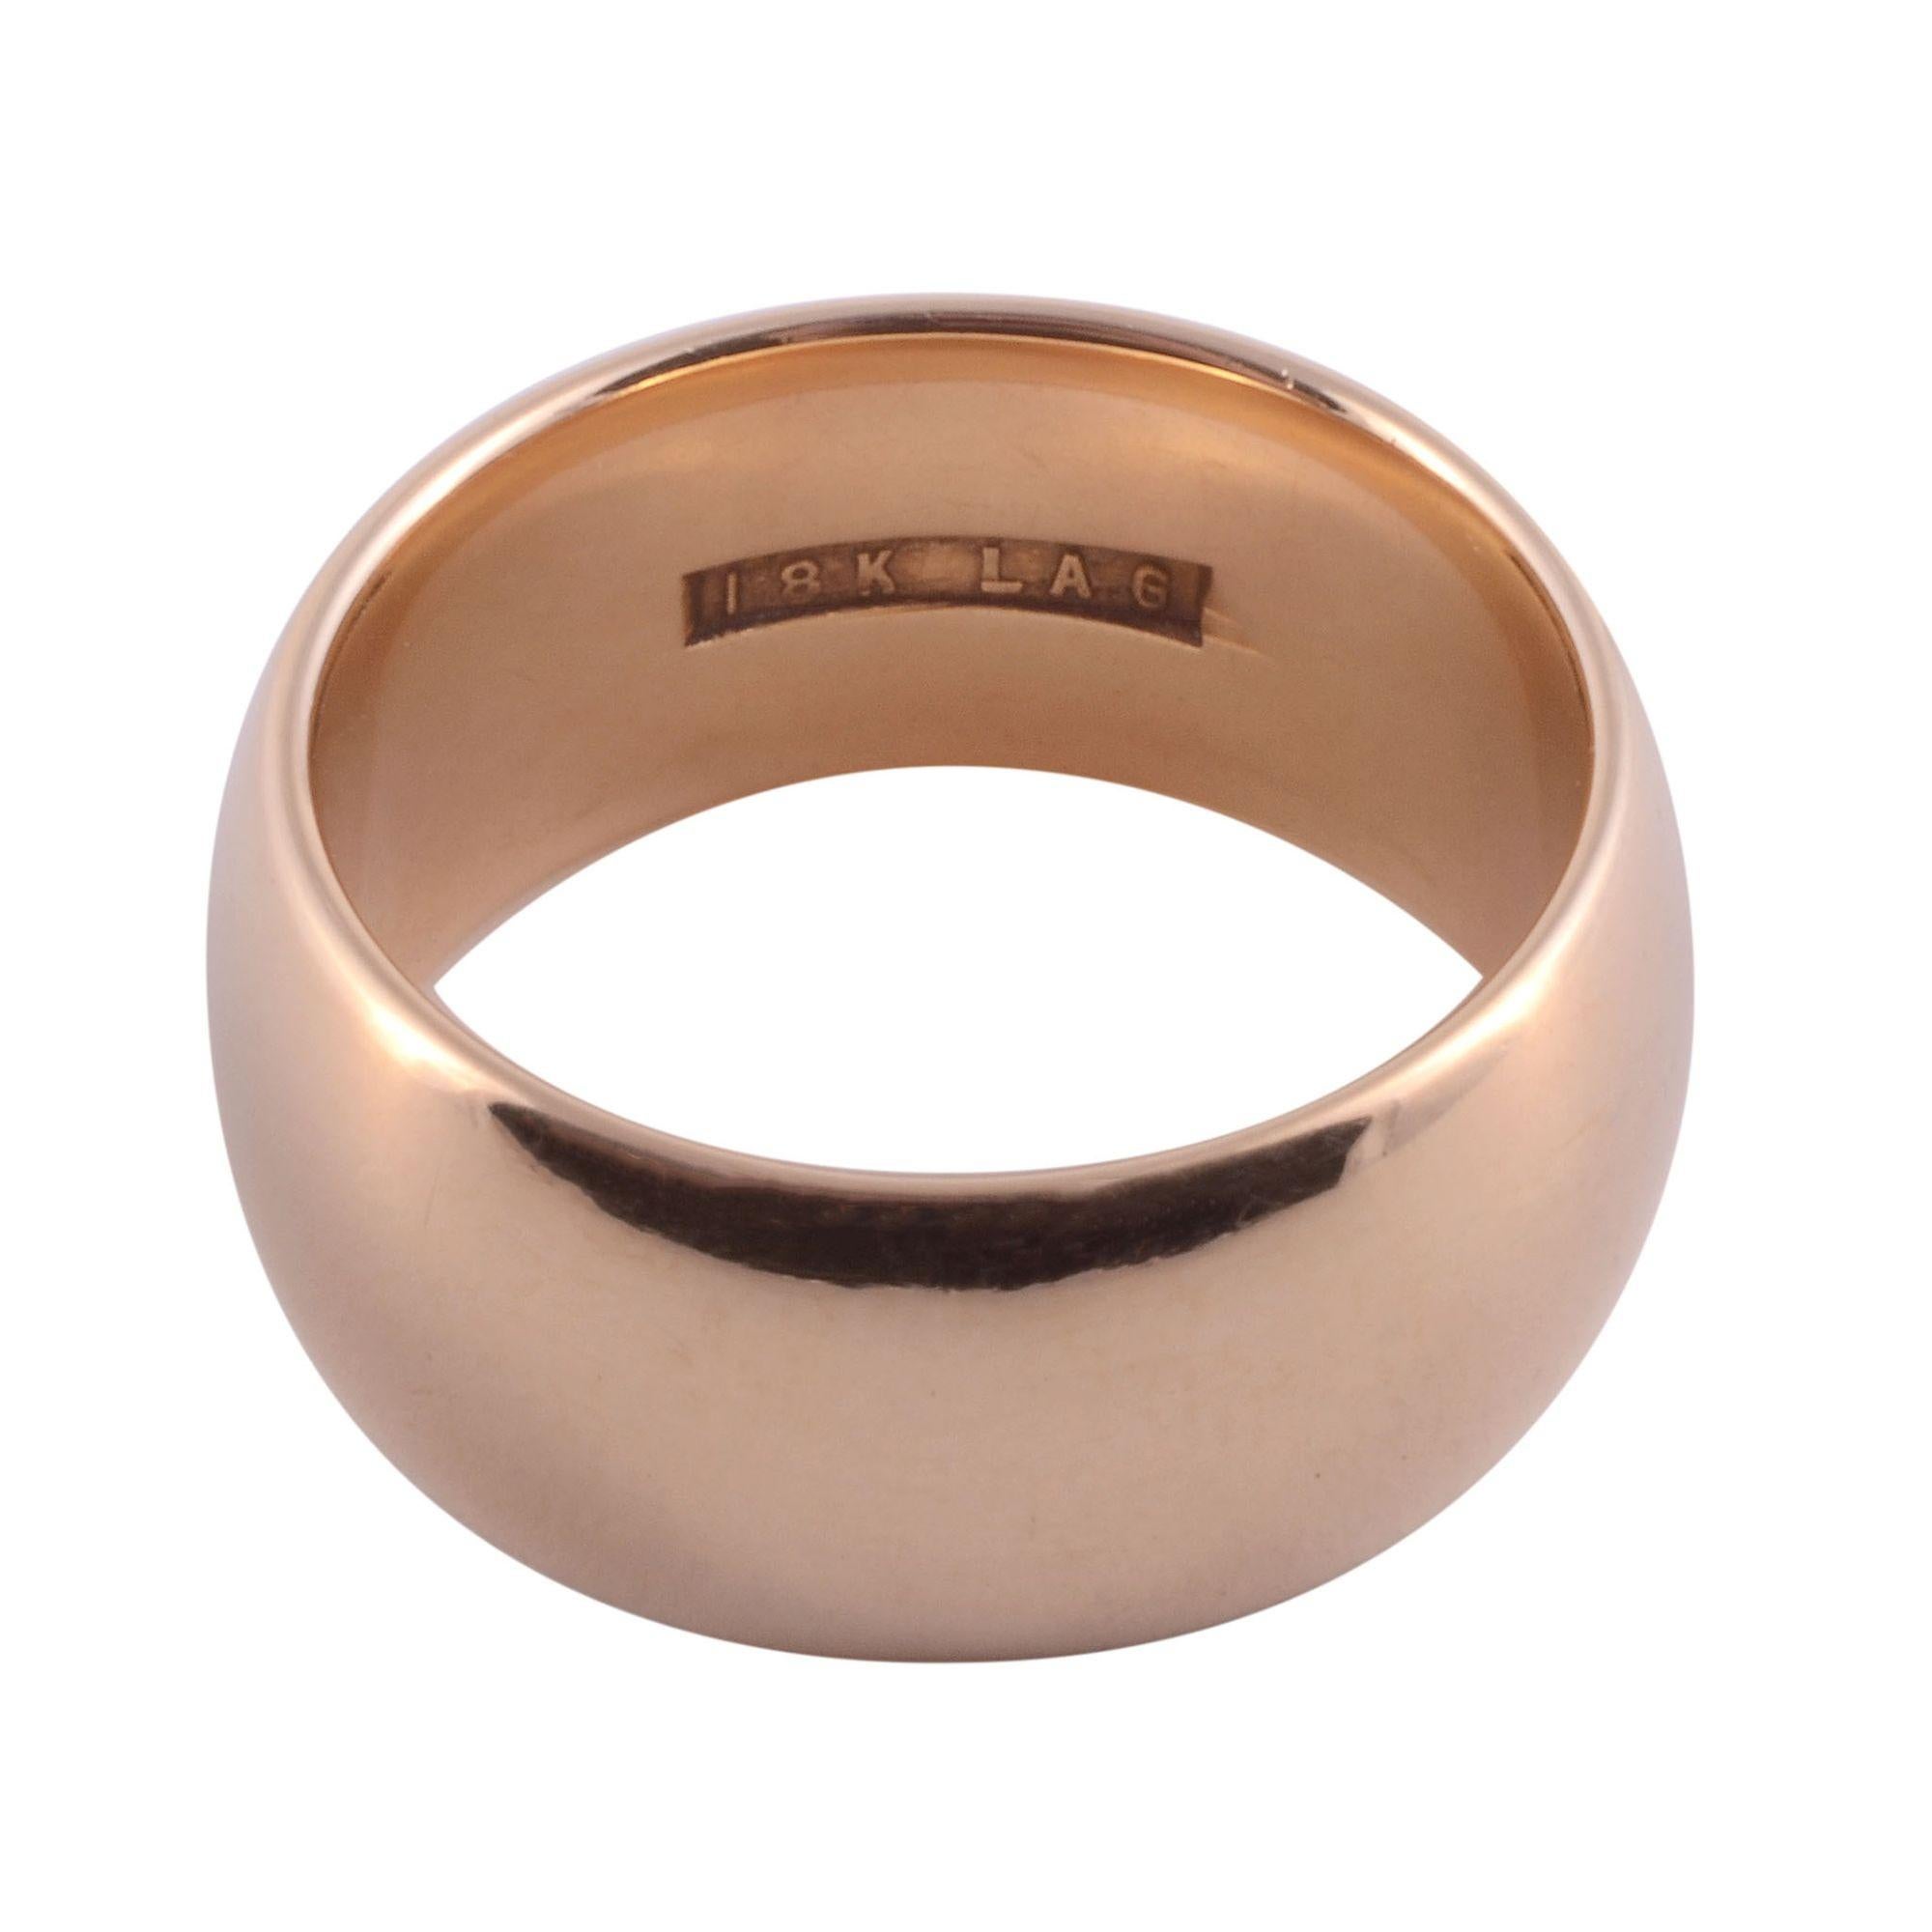 Vintage wide 18K wedding band, circa 1960. This wedding band is crafted in 18 karat yellow gold, is 9.7mm wide, size 8.5, and weighs 18 grams. [KIMH 526]